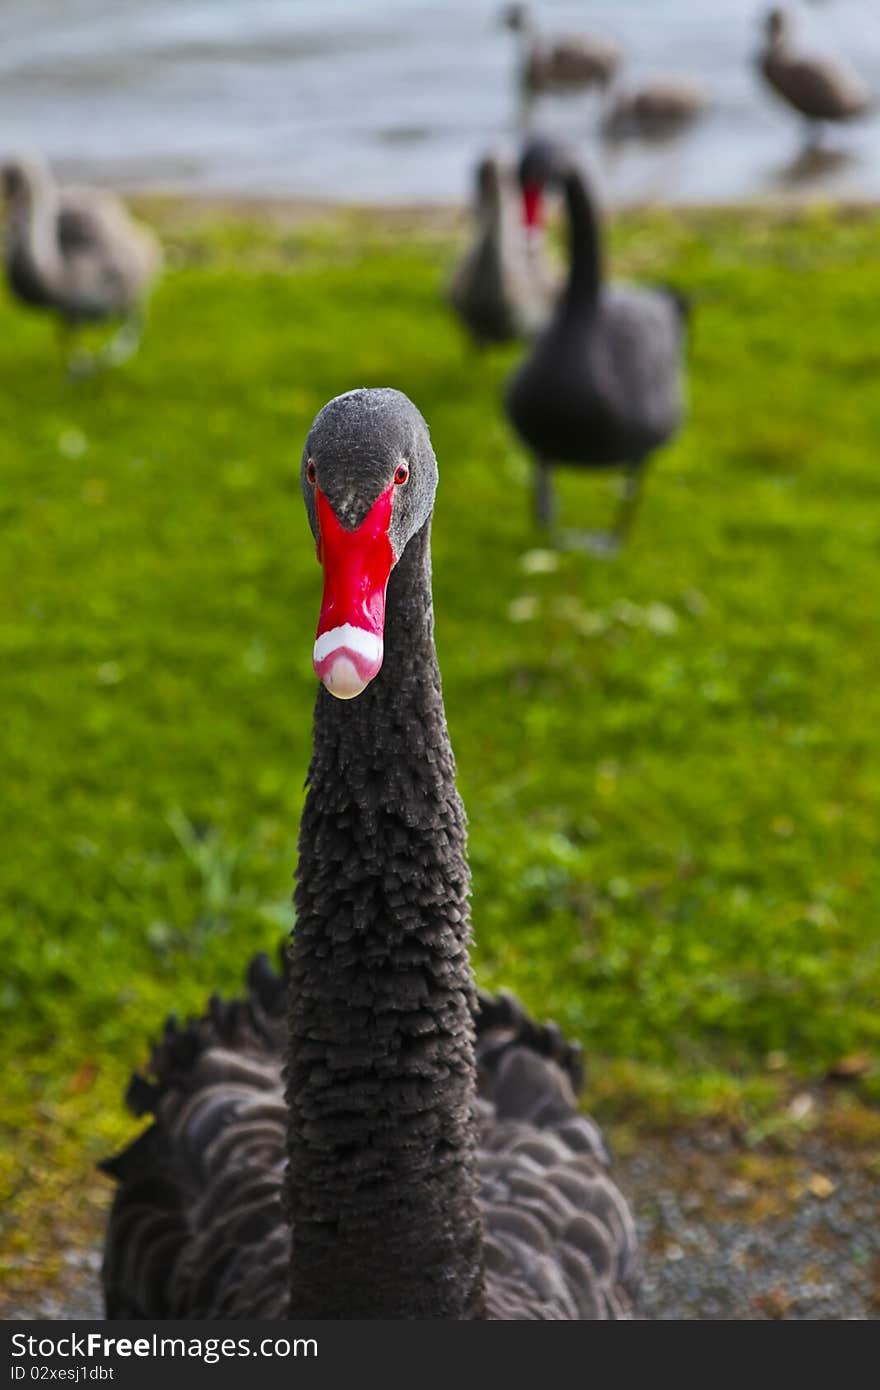 Black swan from new zealand showing himself to have some food